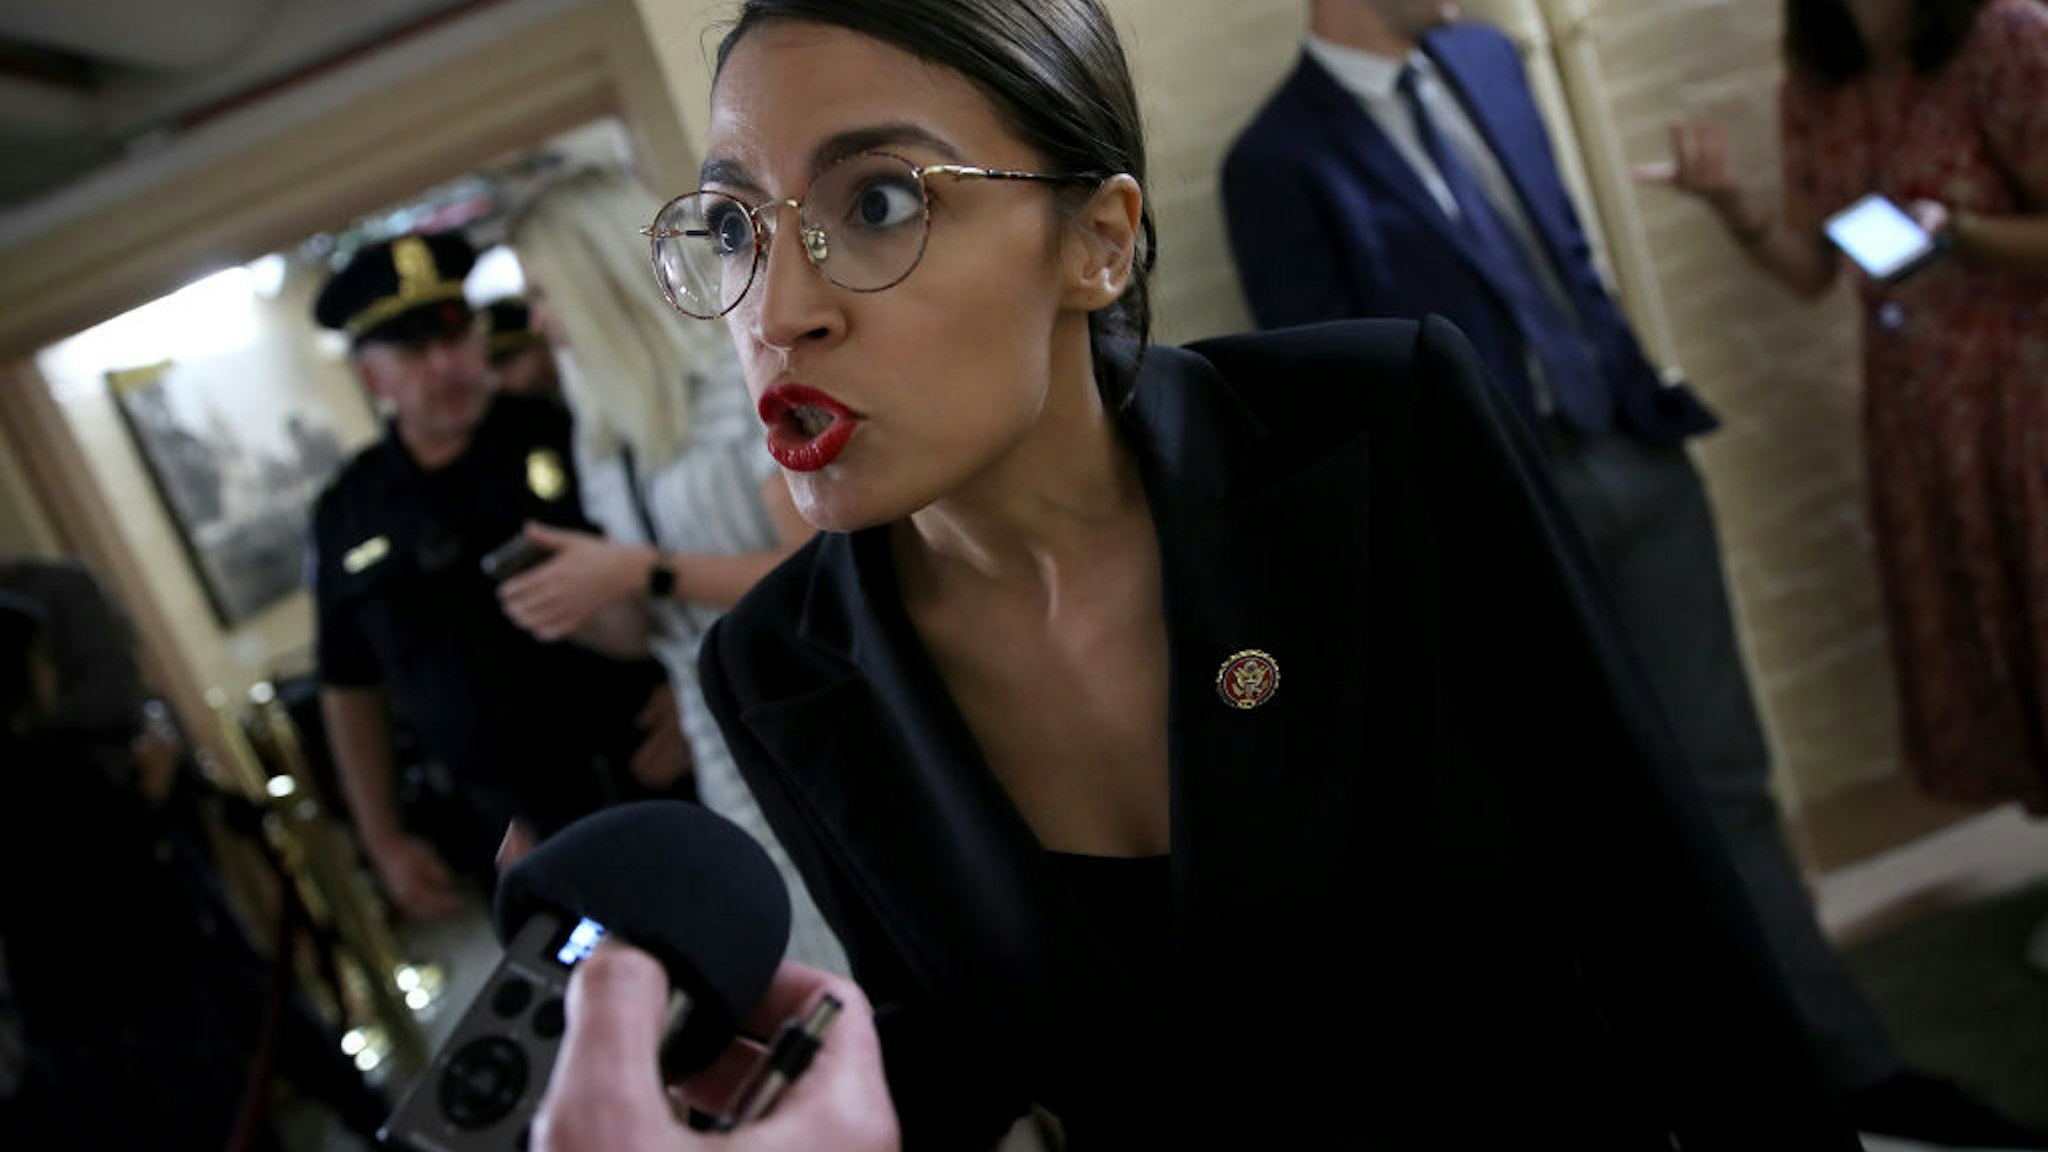 Rep. Alexandria Ocasio-Cortez (D-NY) answers questions from reporters while entering a House Democratic caucus meeting at the U.S. Capitol where formal impeachment proceedings against U.S. President Donald Trump were announced by Speaker of the House Nancy Pelosi September 24, 2019 in Washington, DC.